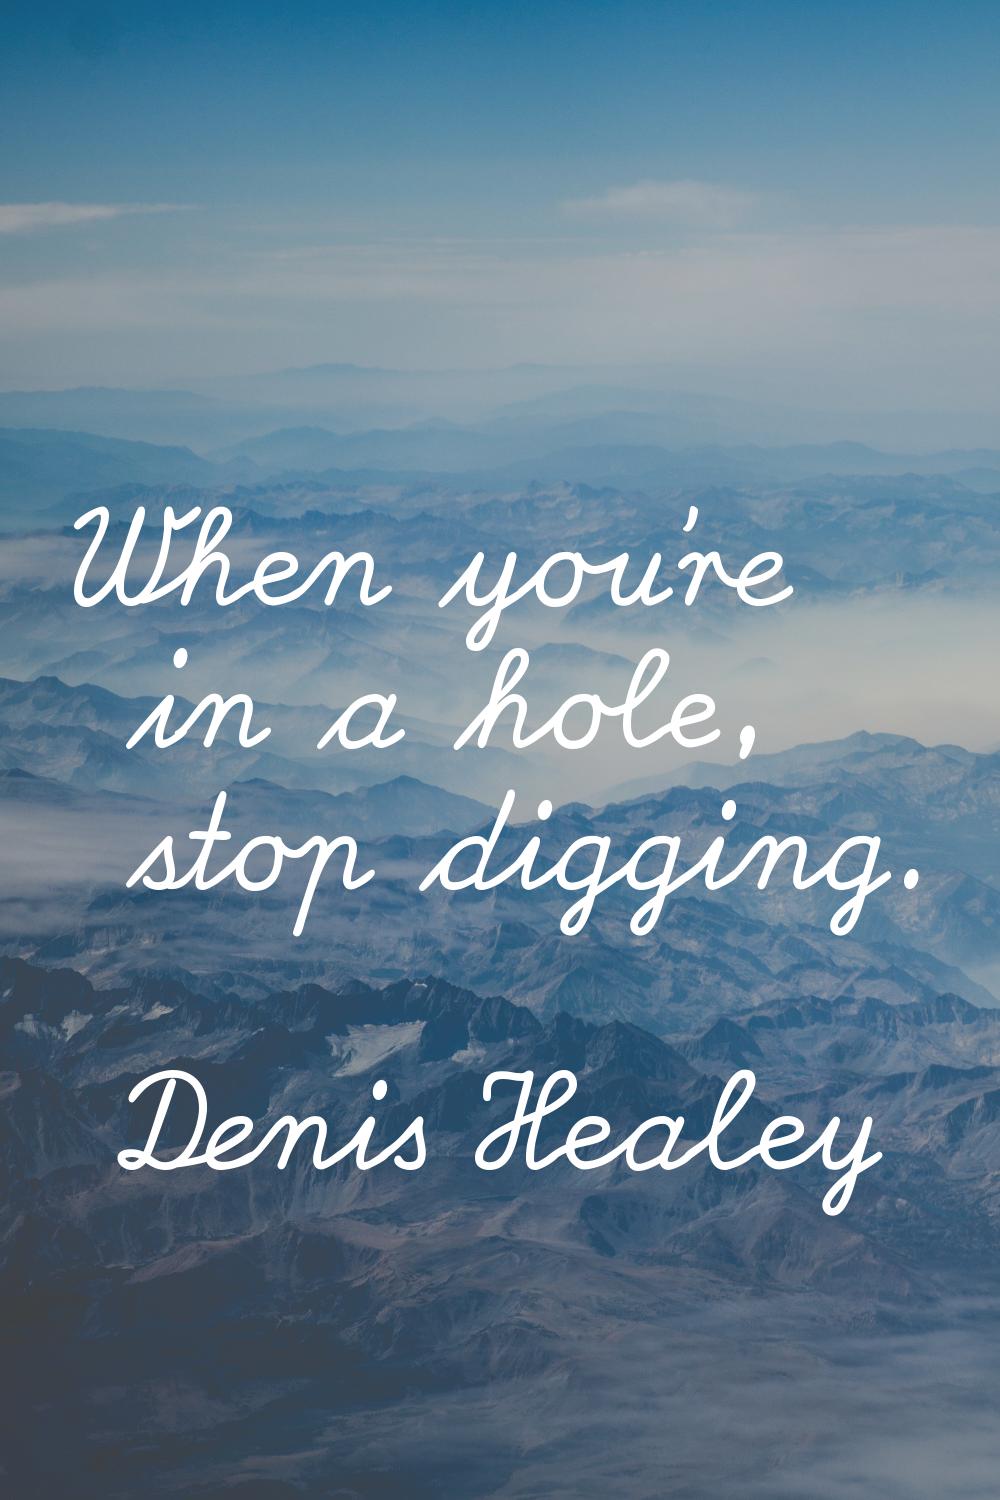 When you're in a hole, stop digging.